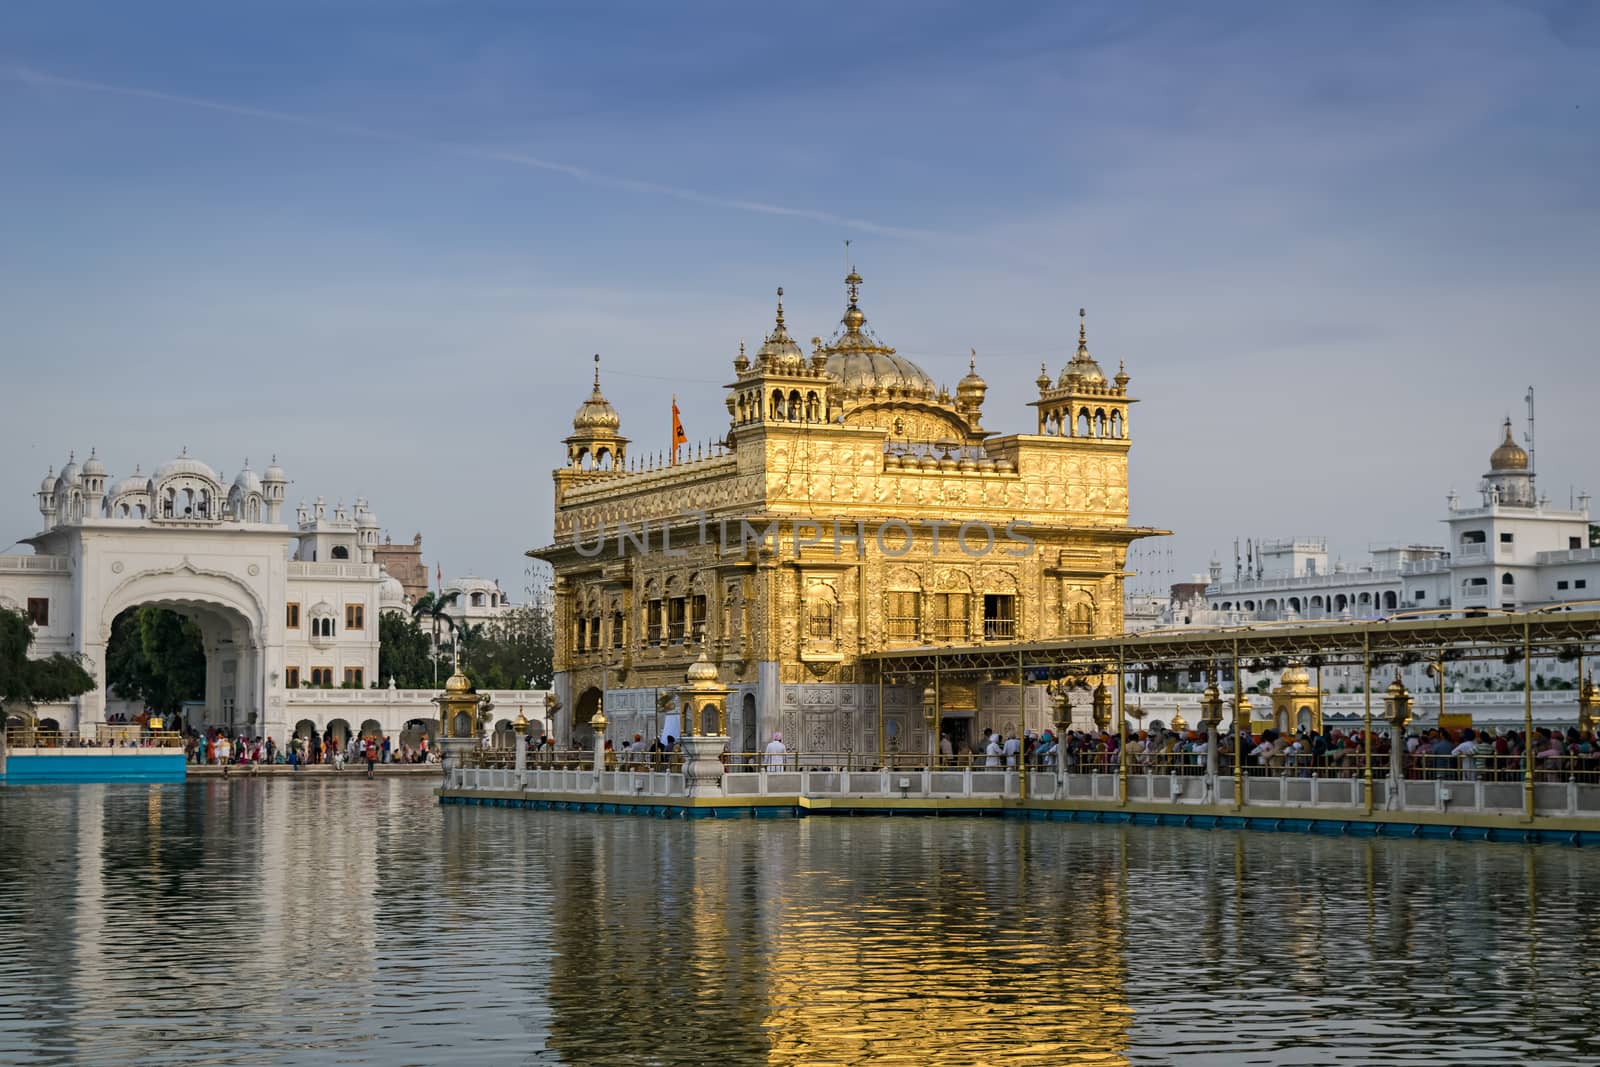 Evening view of the Golden temple in Amritsar, Punjab, India with beautiful blue sky. Can be used as wallpaper